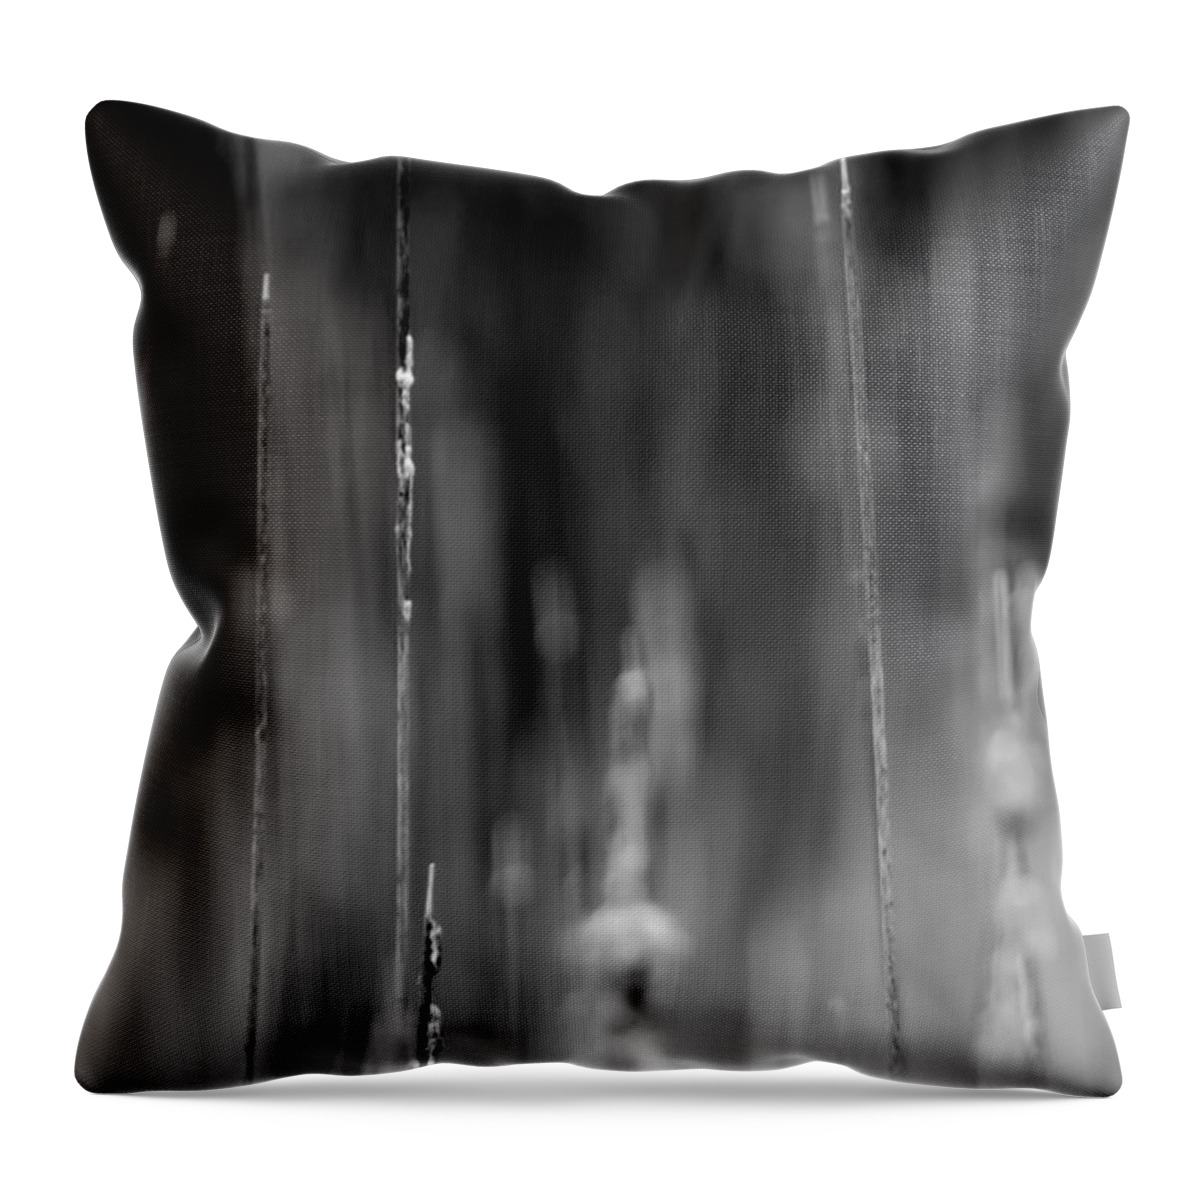  Throw Pillow featuring the photograph Life's Ripple - Left by Steven Santamour